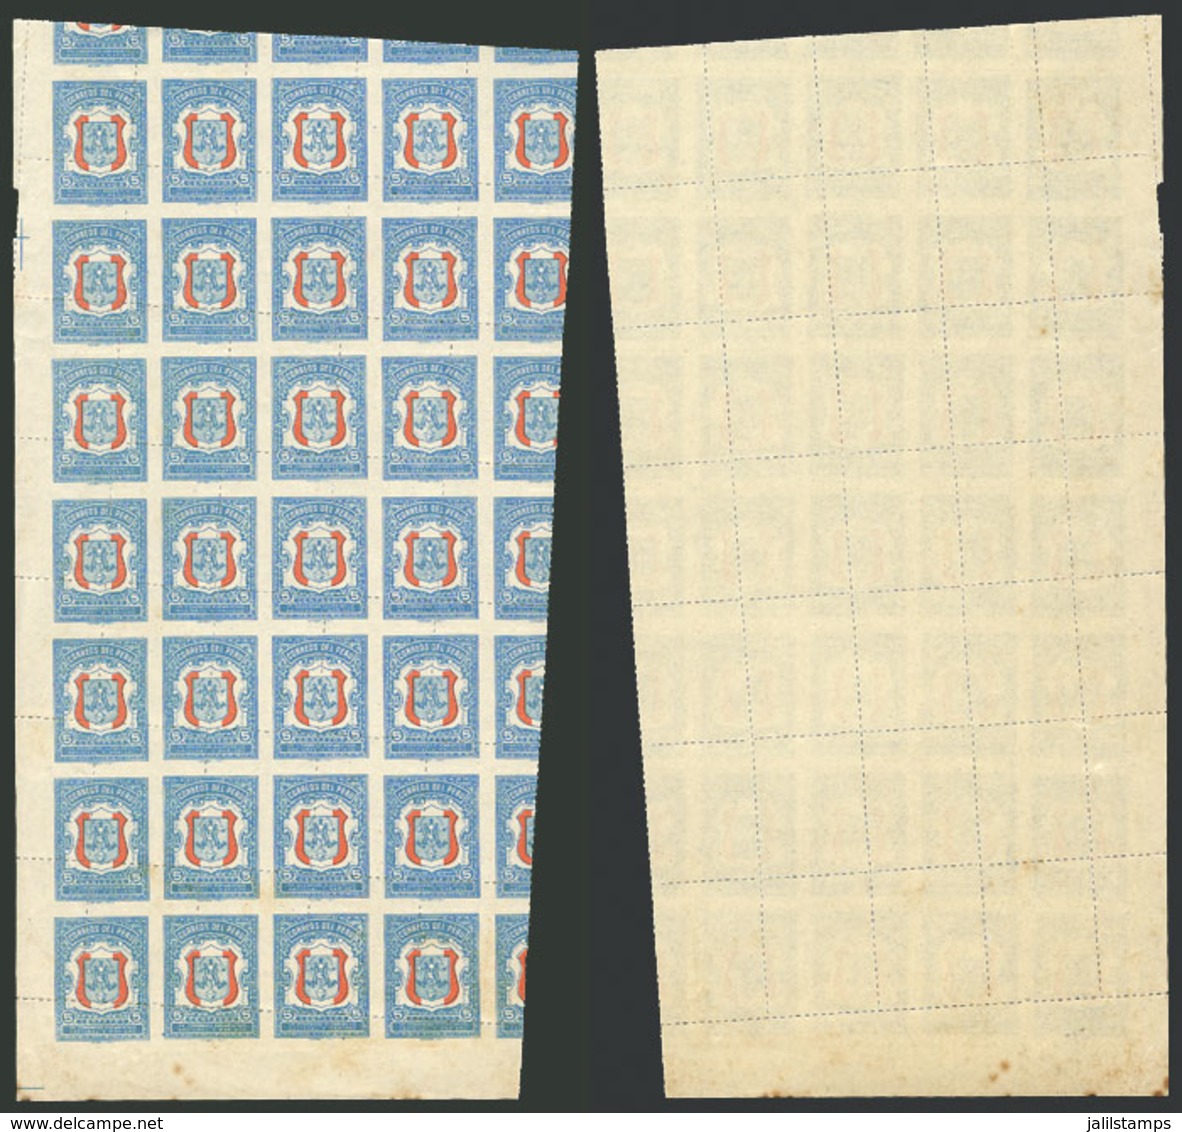 PERU: Sc.RA34, 1954 Postal Tax Of 5c. To Collect Funds For The Eucharistic Congress, Block Of 30 With DIAGONAL PERFORATI - Peru